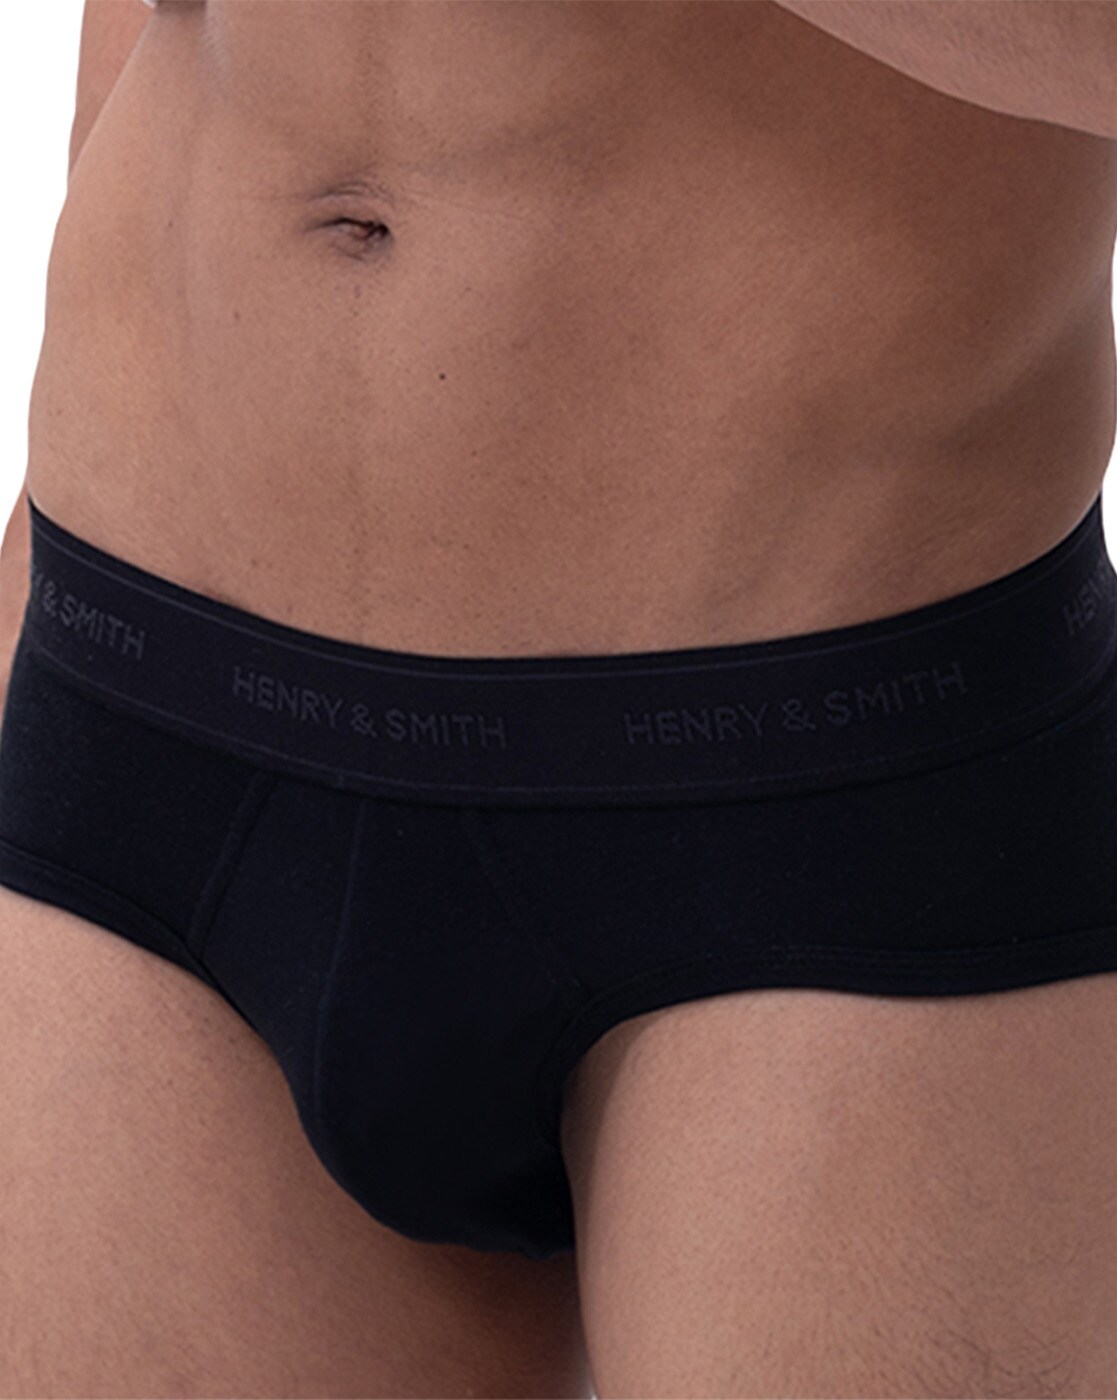 Briefs with Typographic Waistband